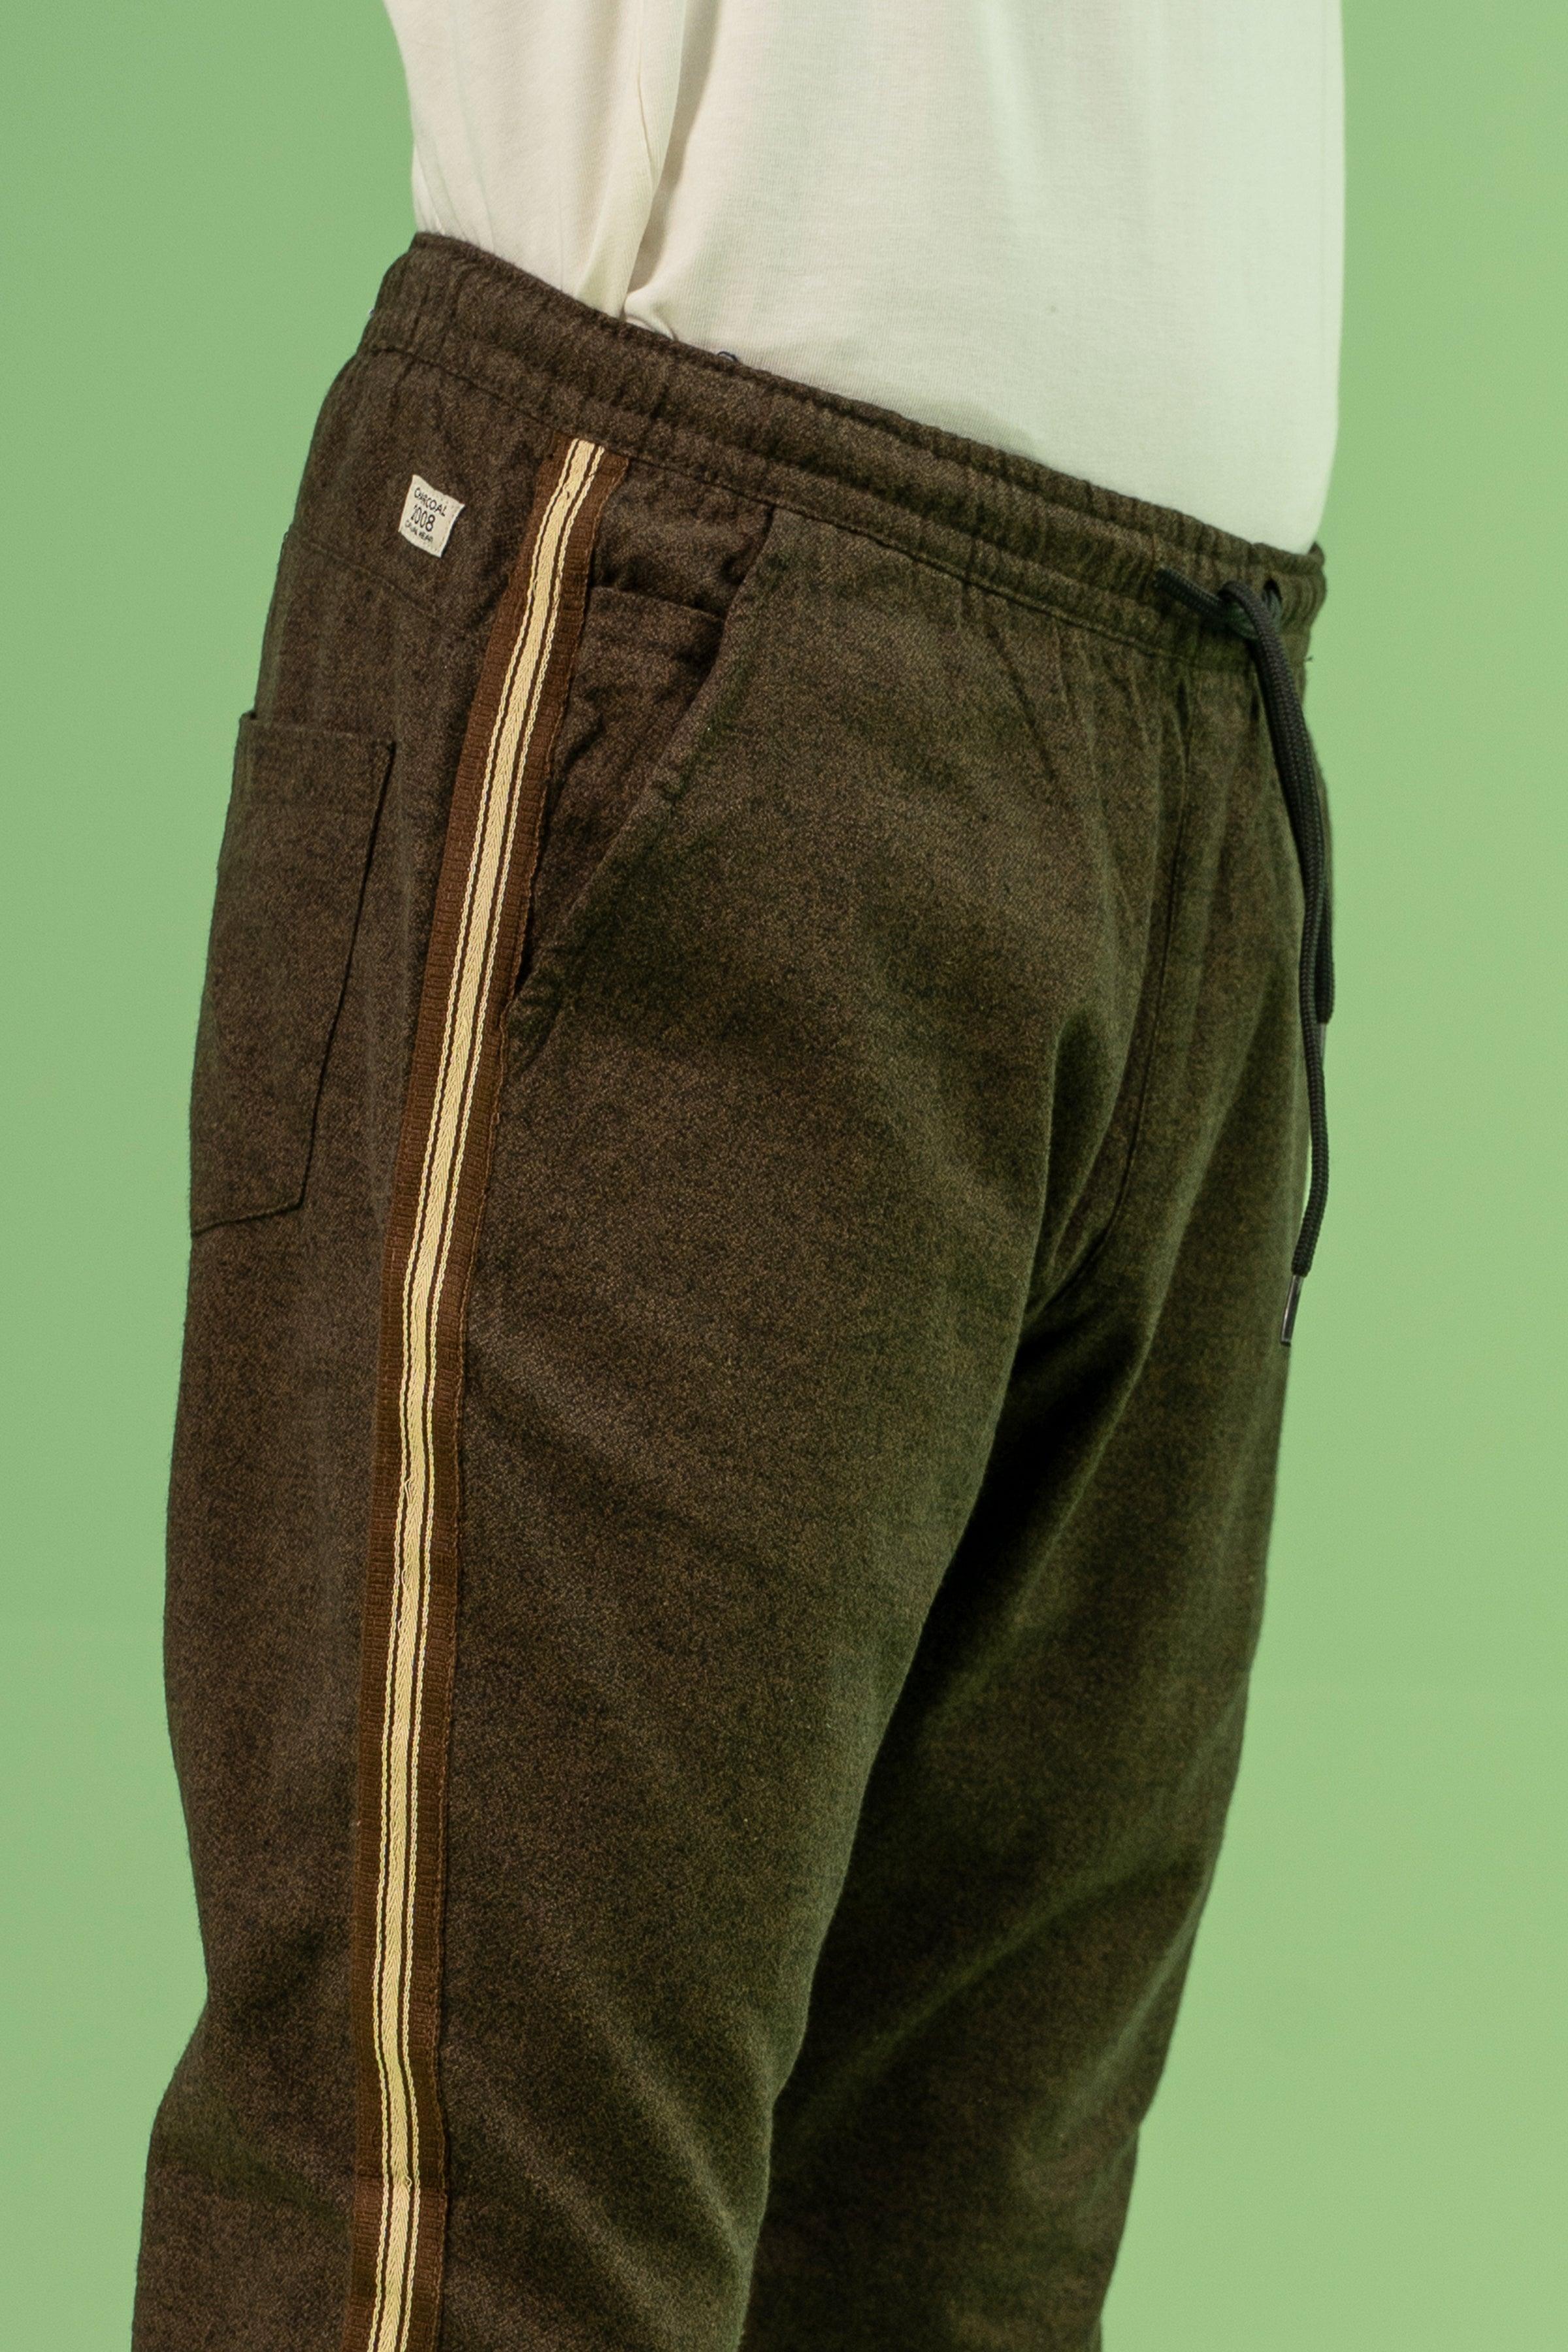 SELF TEXTURED CONTRAST TAPE TROUSER BROWN KHAKI at Charcoal Clothing